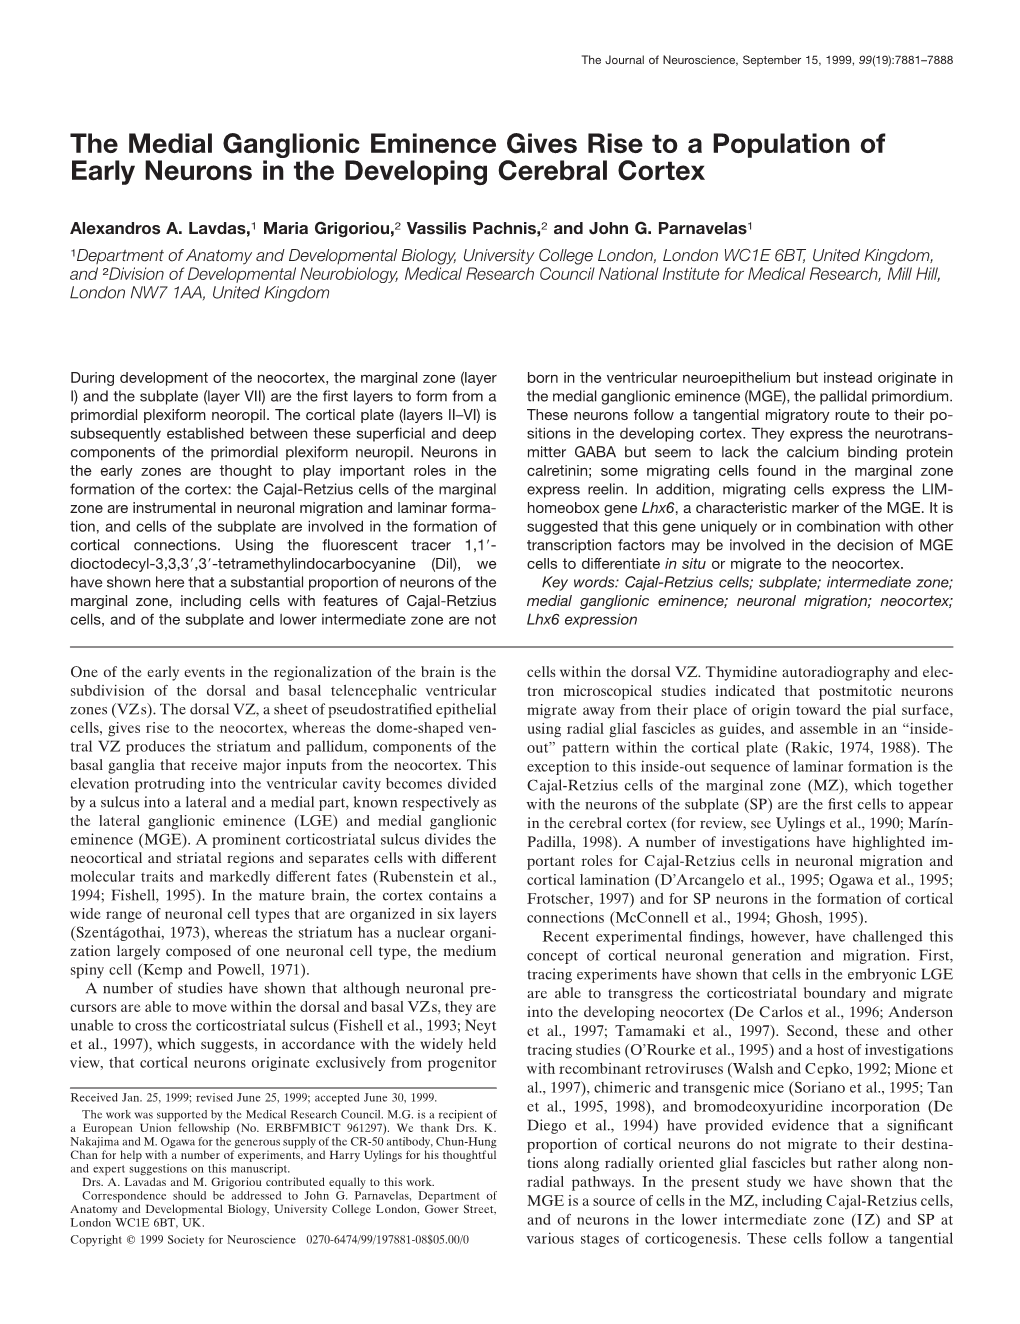 The Medial Ganglionic Eminence Gives Rise to a Population of Early Neurons in the Developing Cerebral Cortex